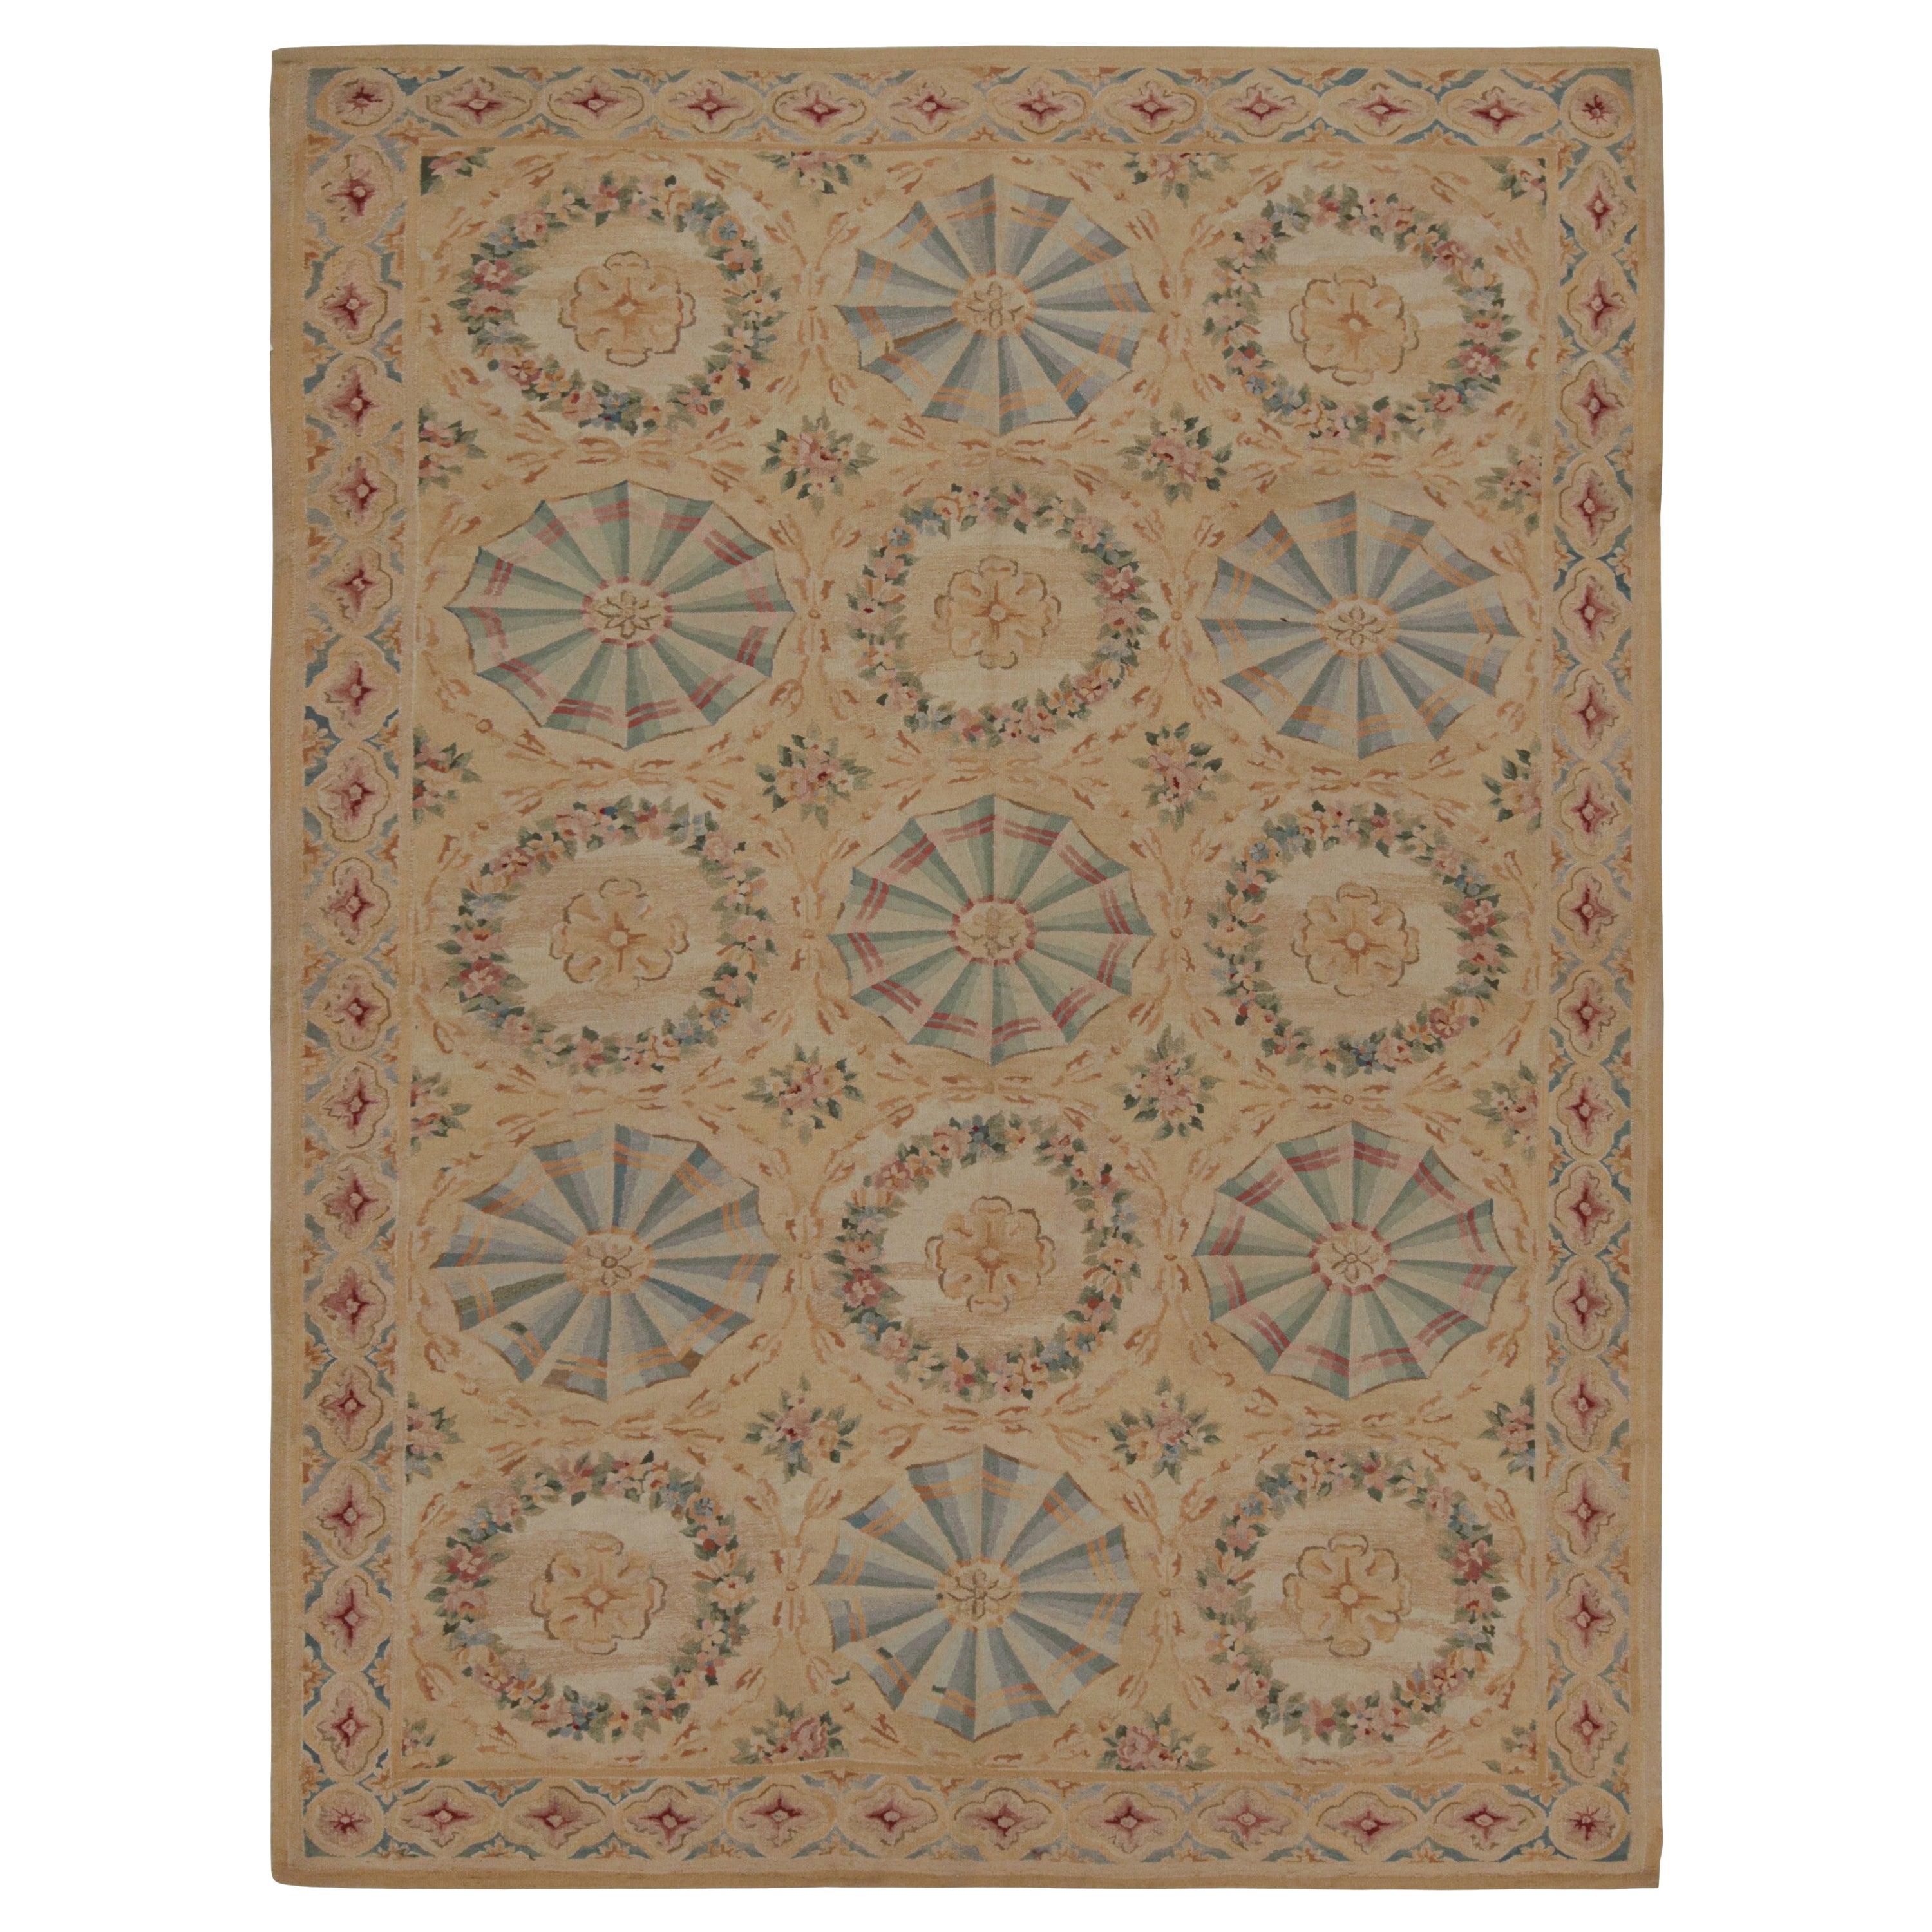 Rug & Kilim’s Aubusson Style Flatweave Rug with Floral Patterns and Medallions